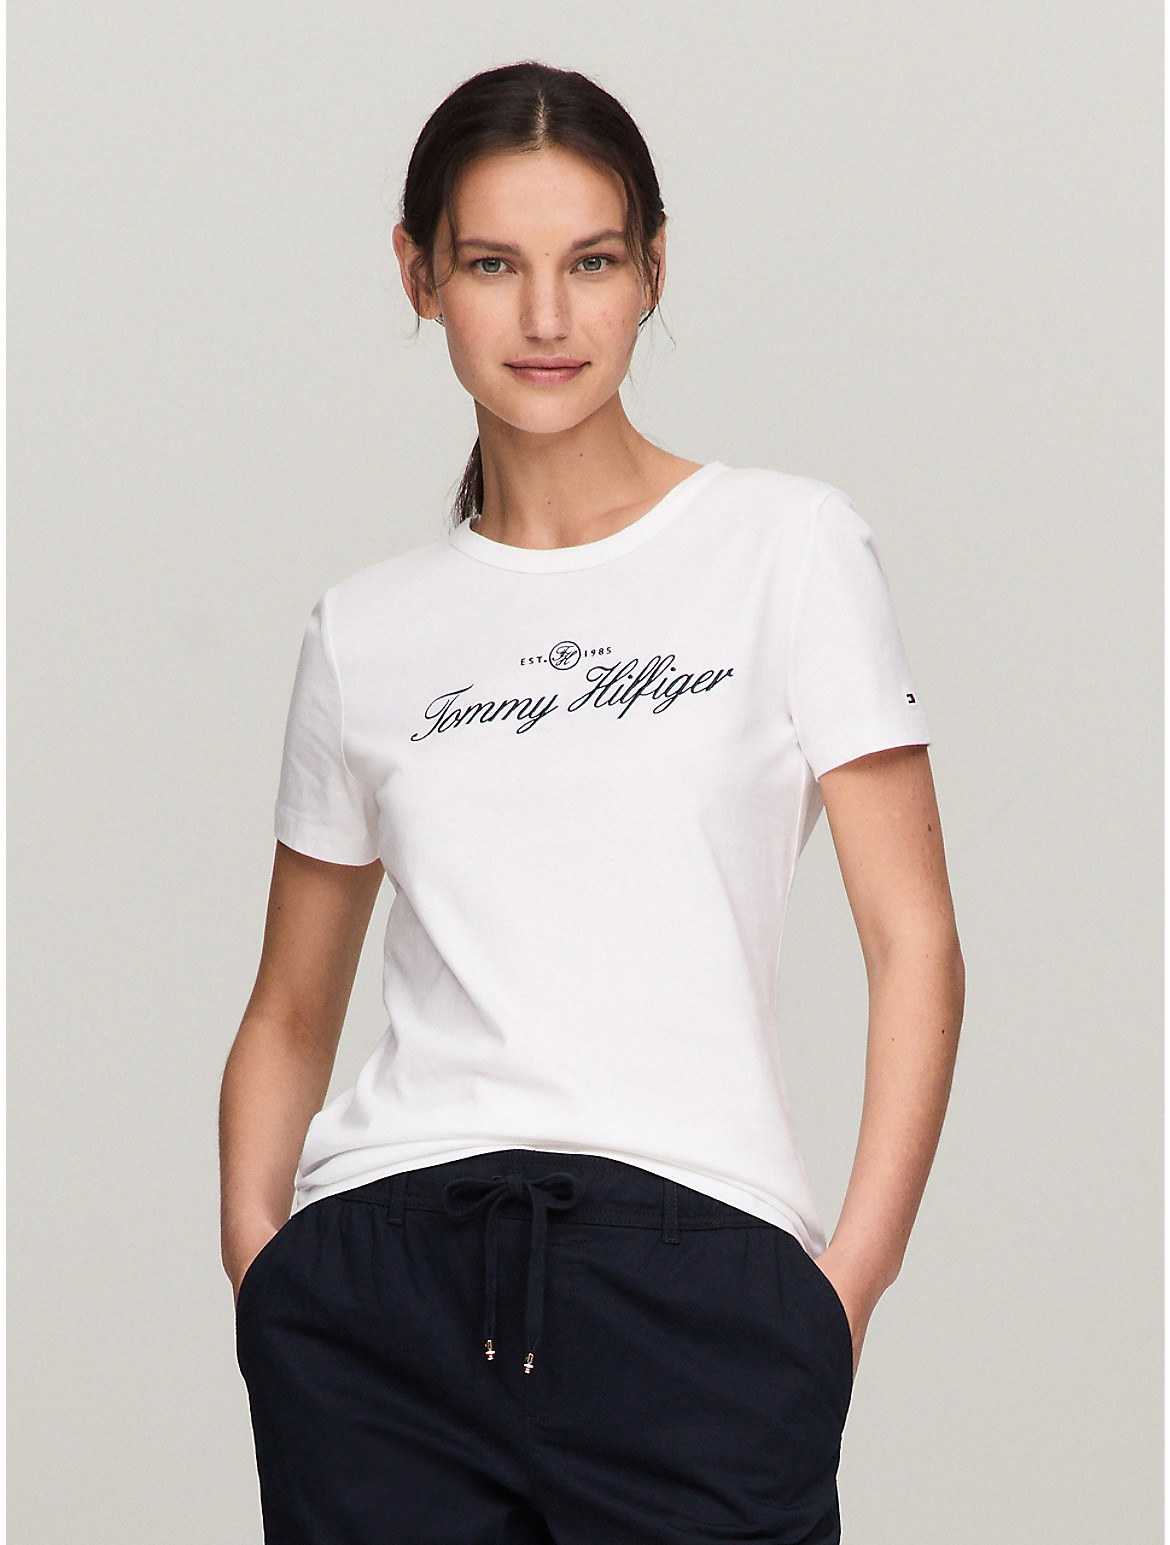 Tommy Hilfiger Women's Slim Fit Embroidered Signature T-Shirt